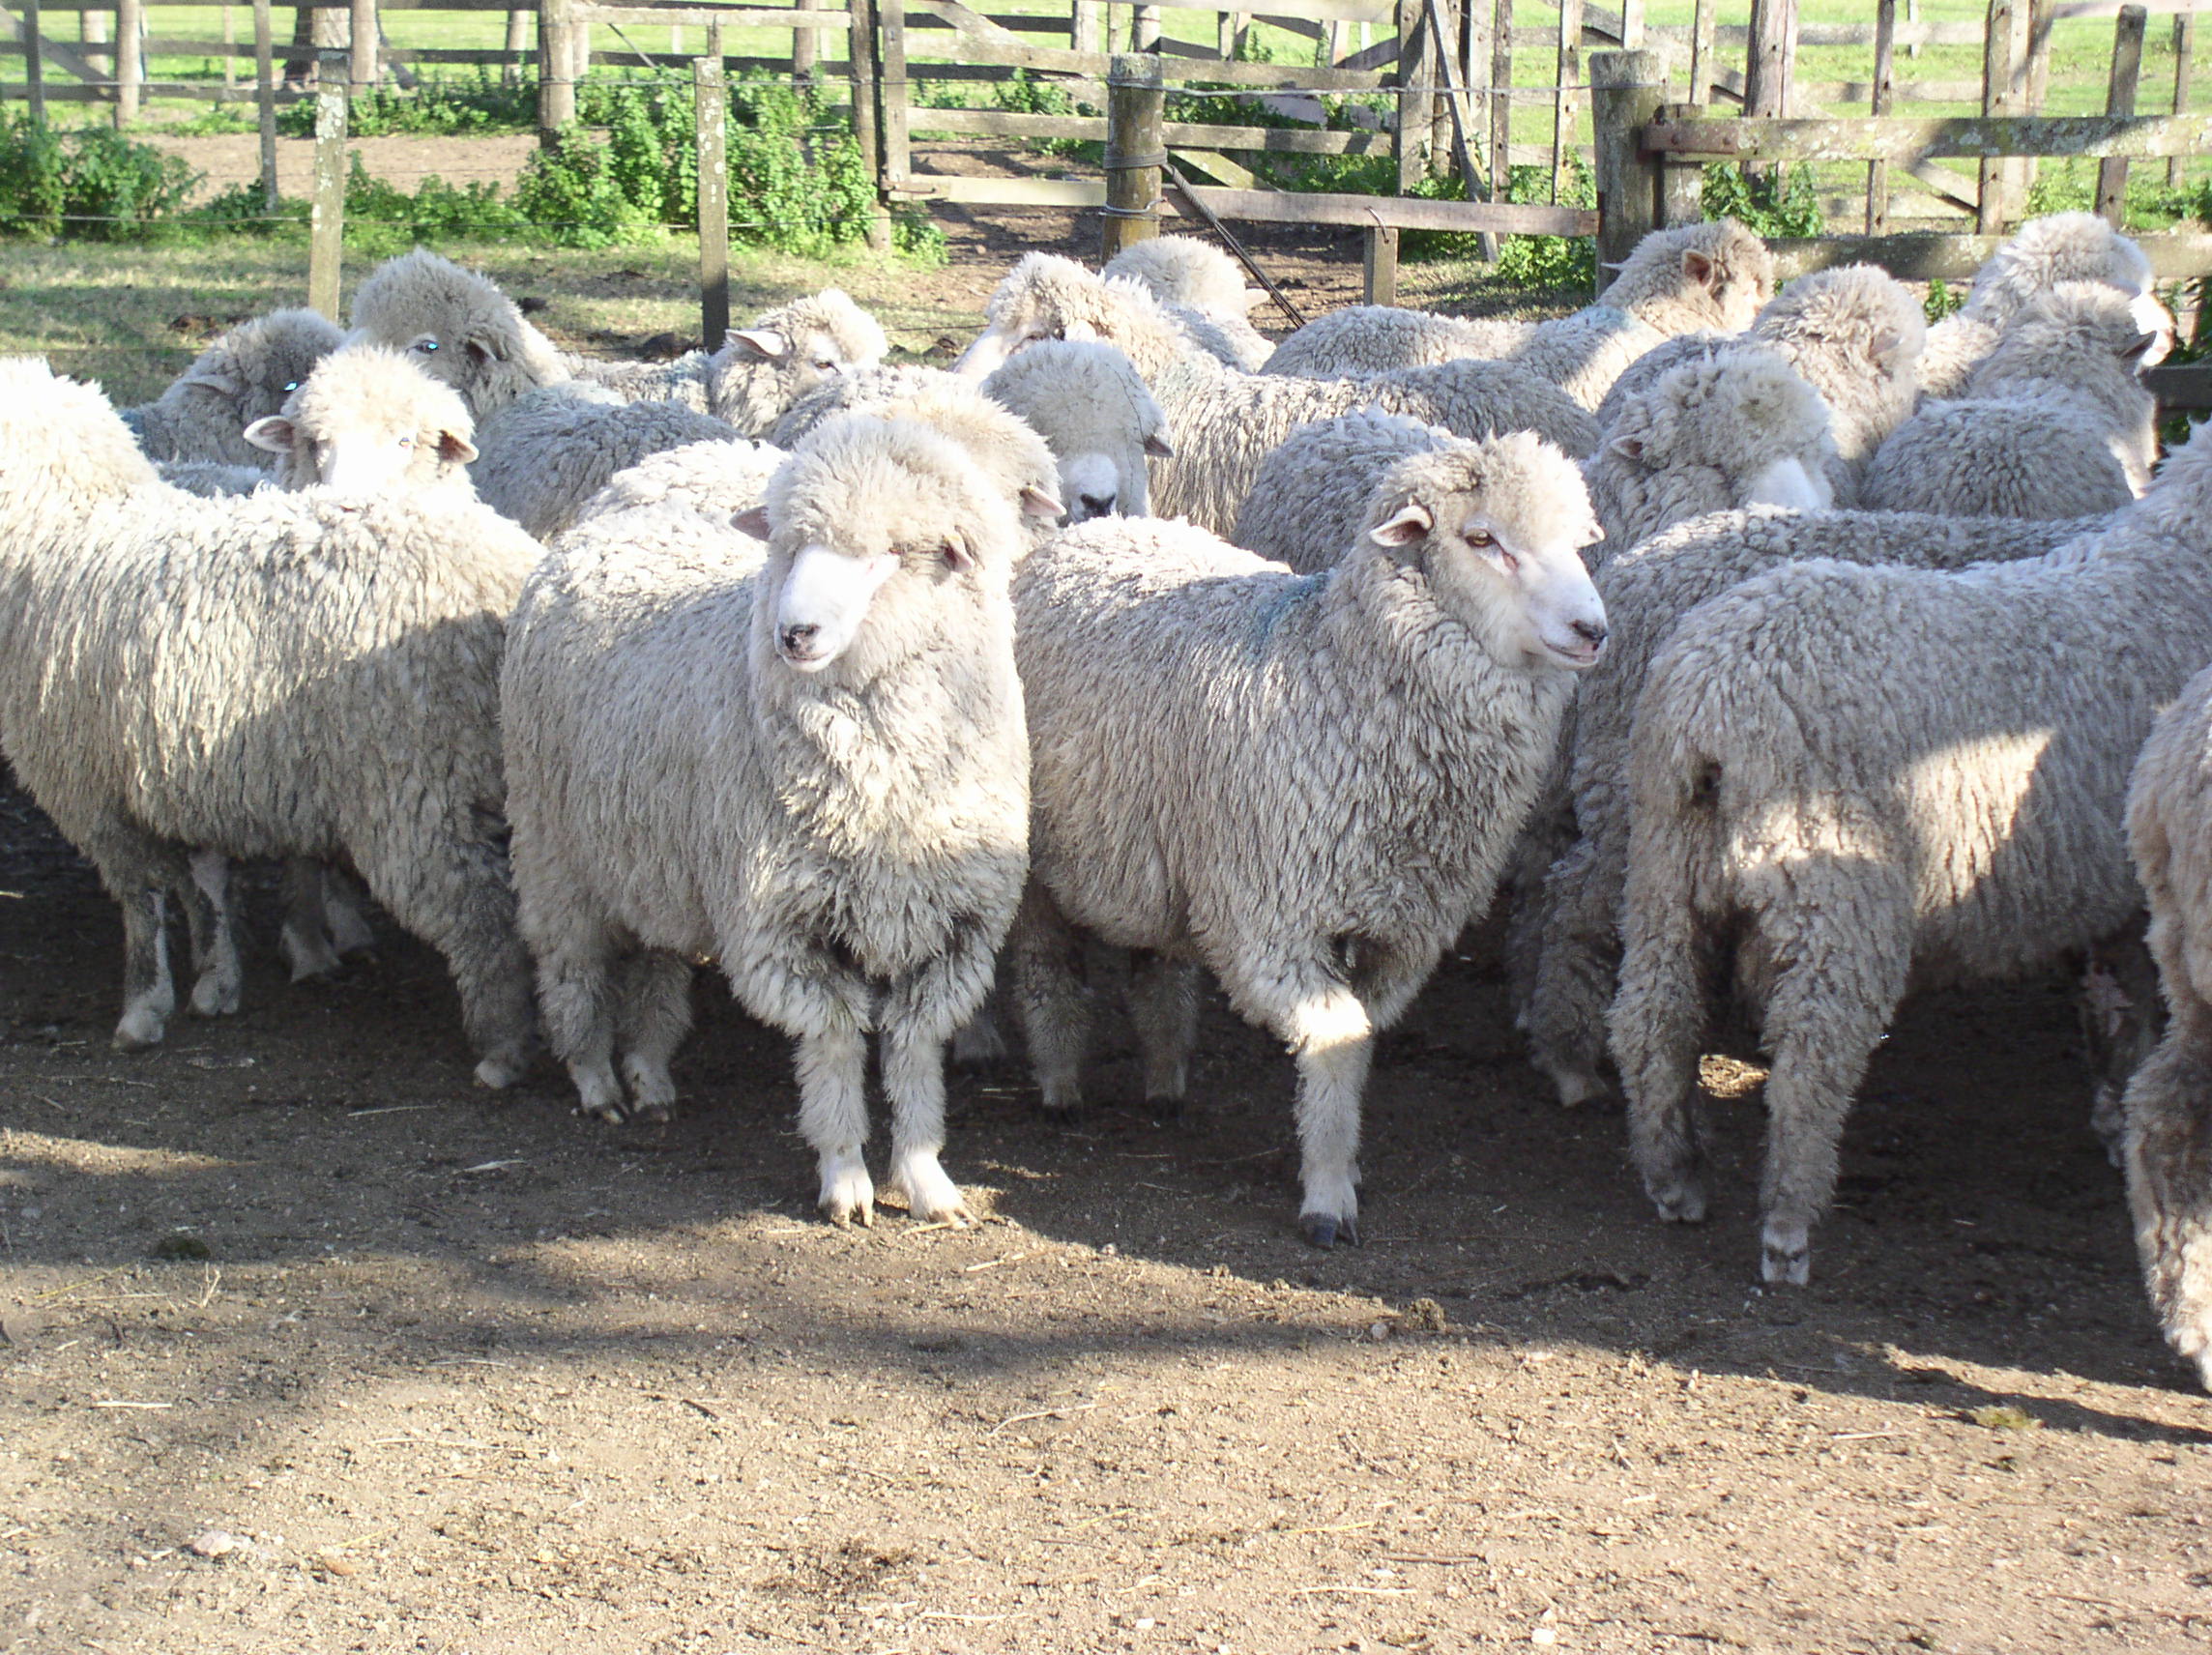 Uruguay: Sheep Stock and Wool Production